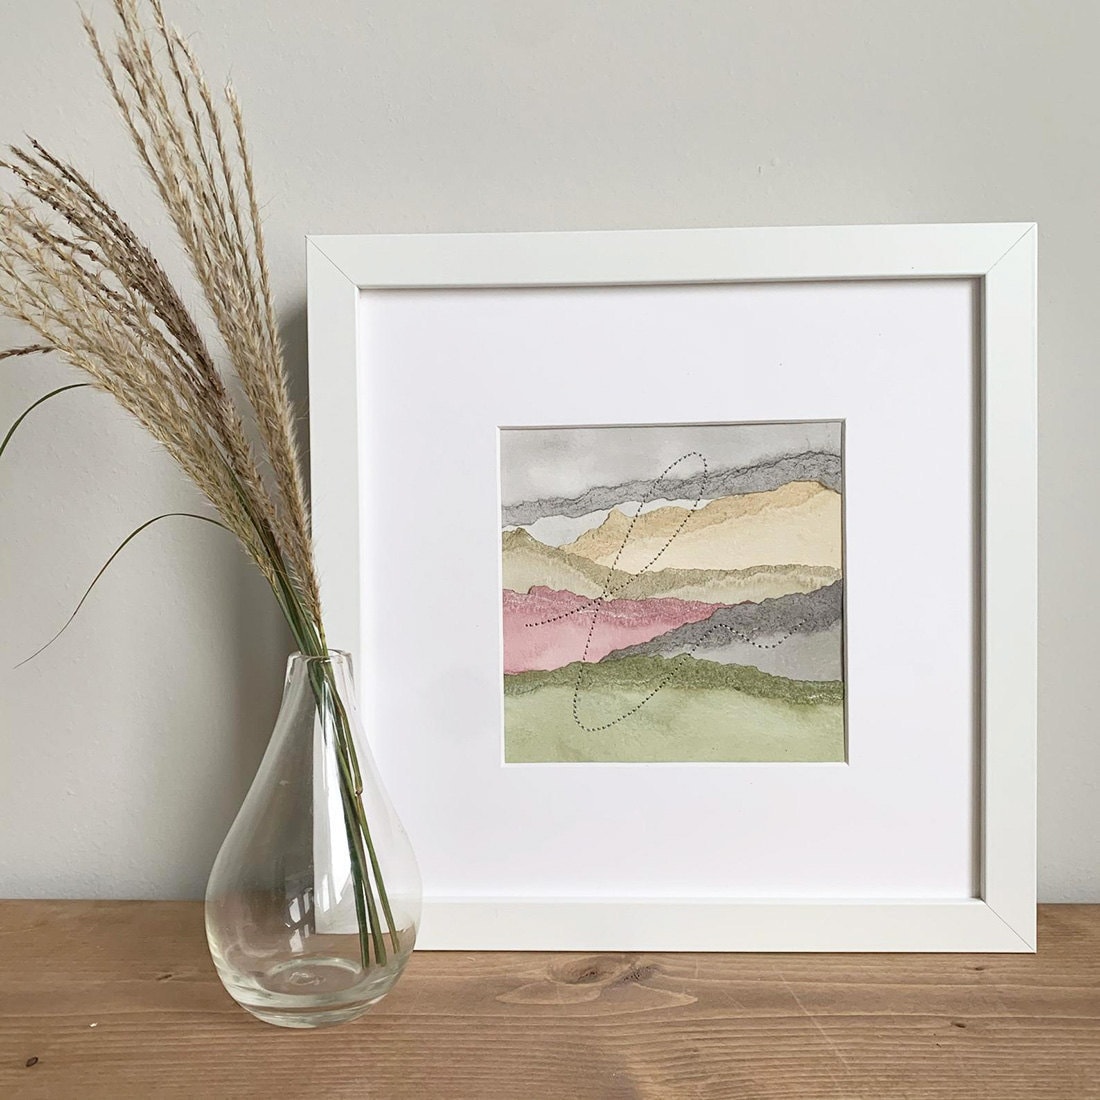 Abstract landscape wall art from Ayaka MP Art on Etsy